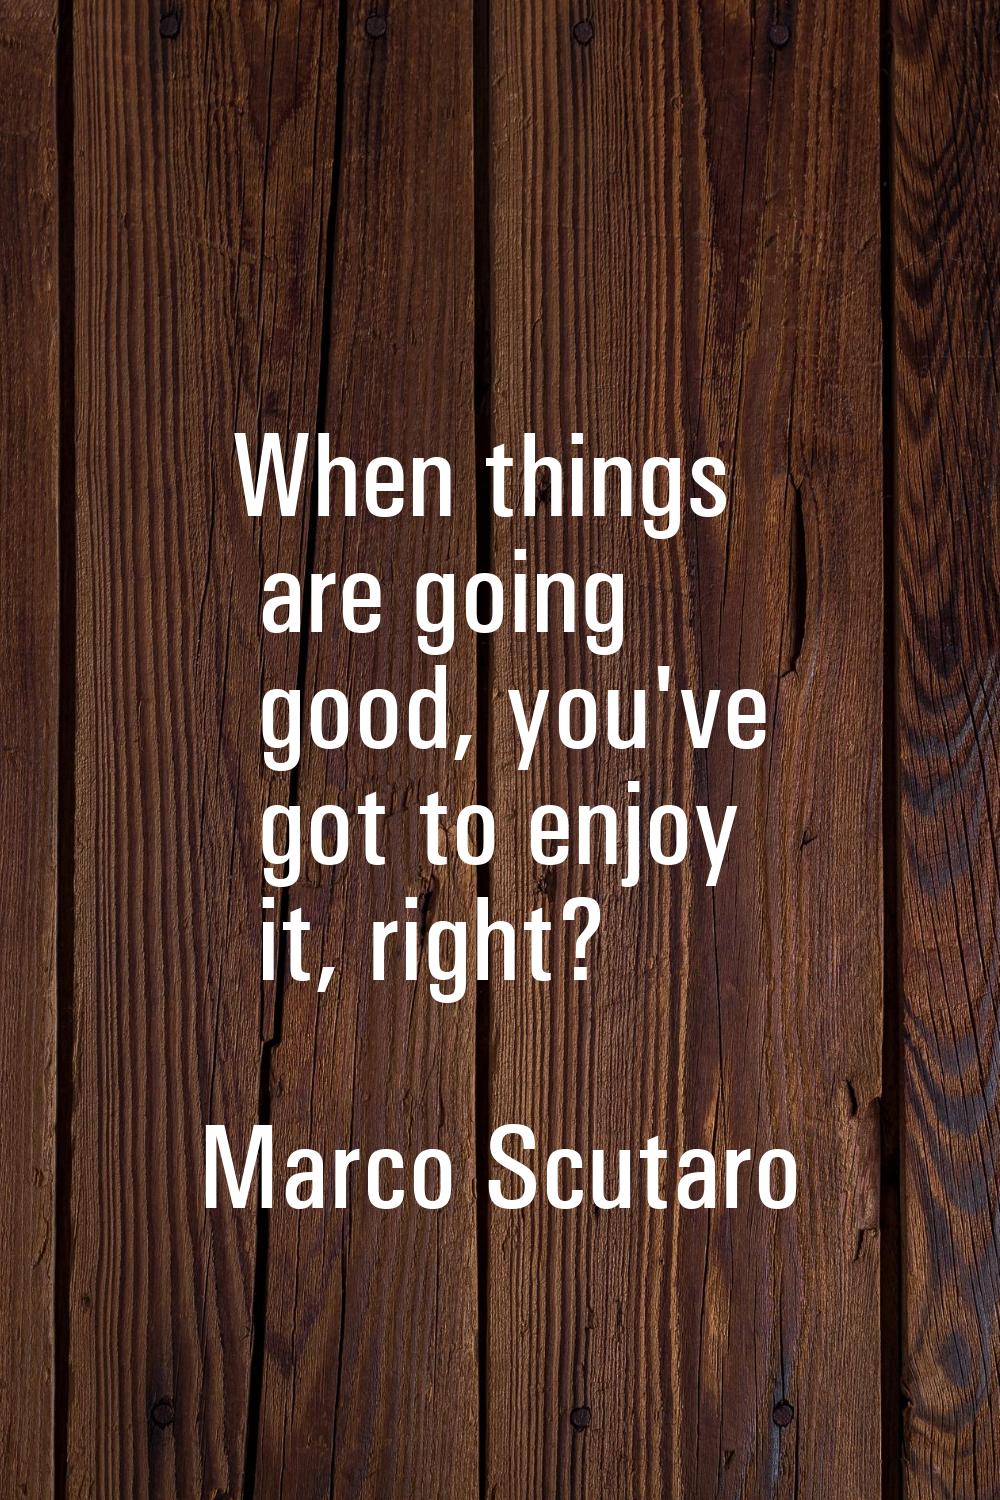 When things are going good, you've got to enjoy it, right?